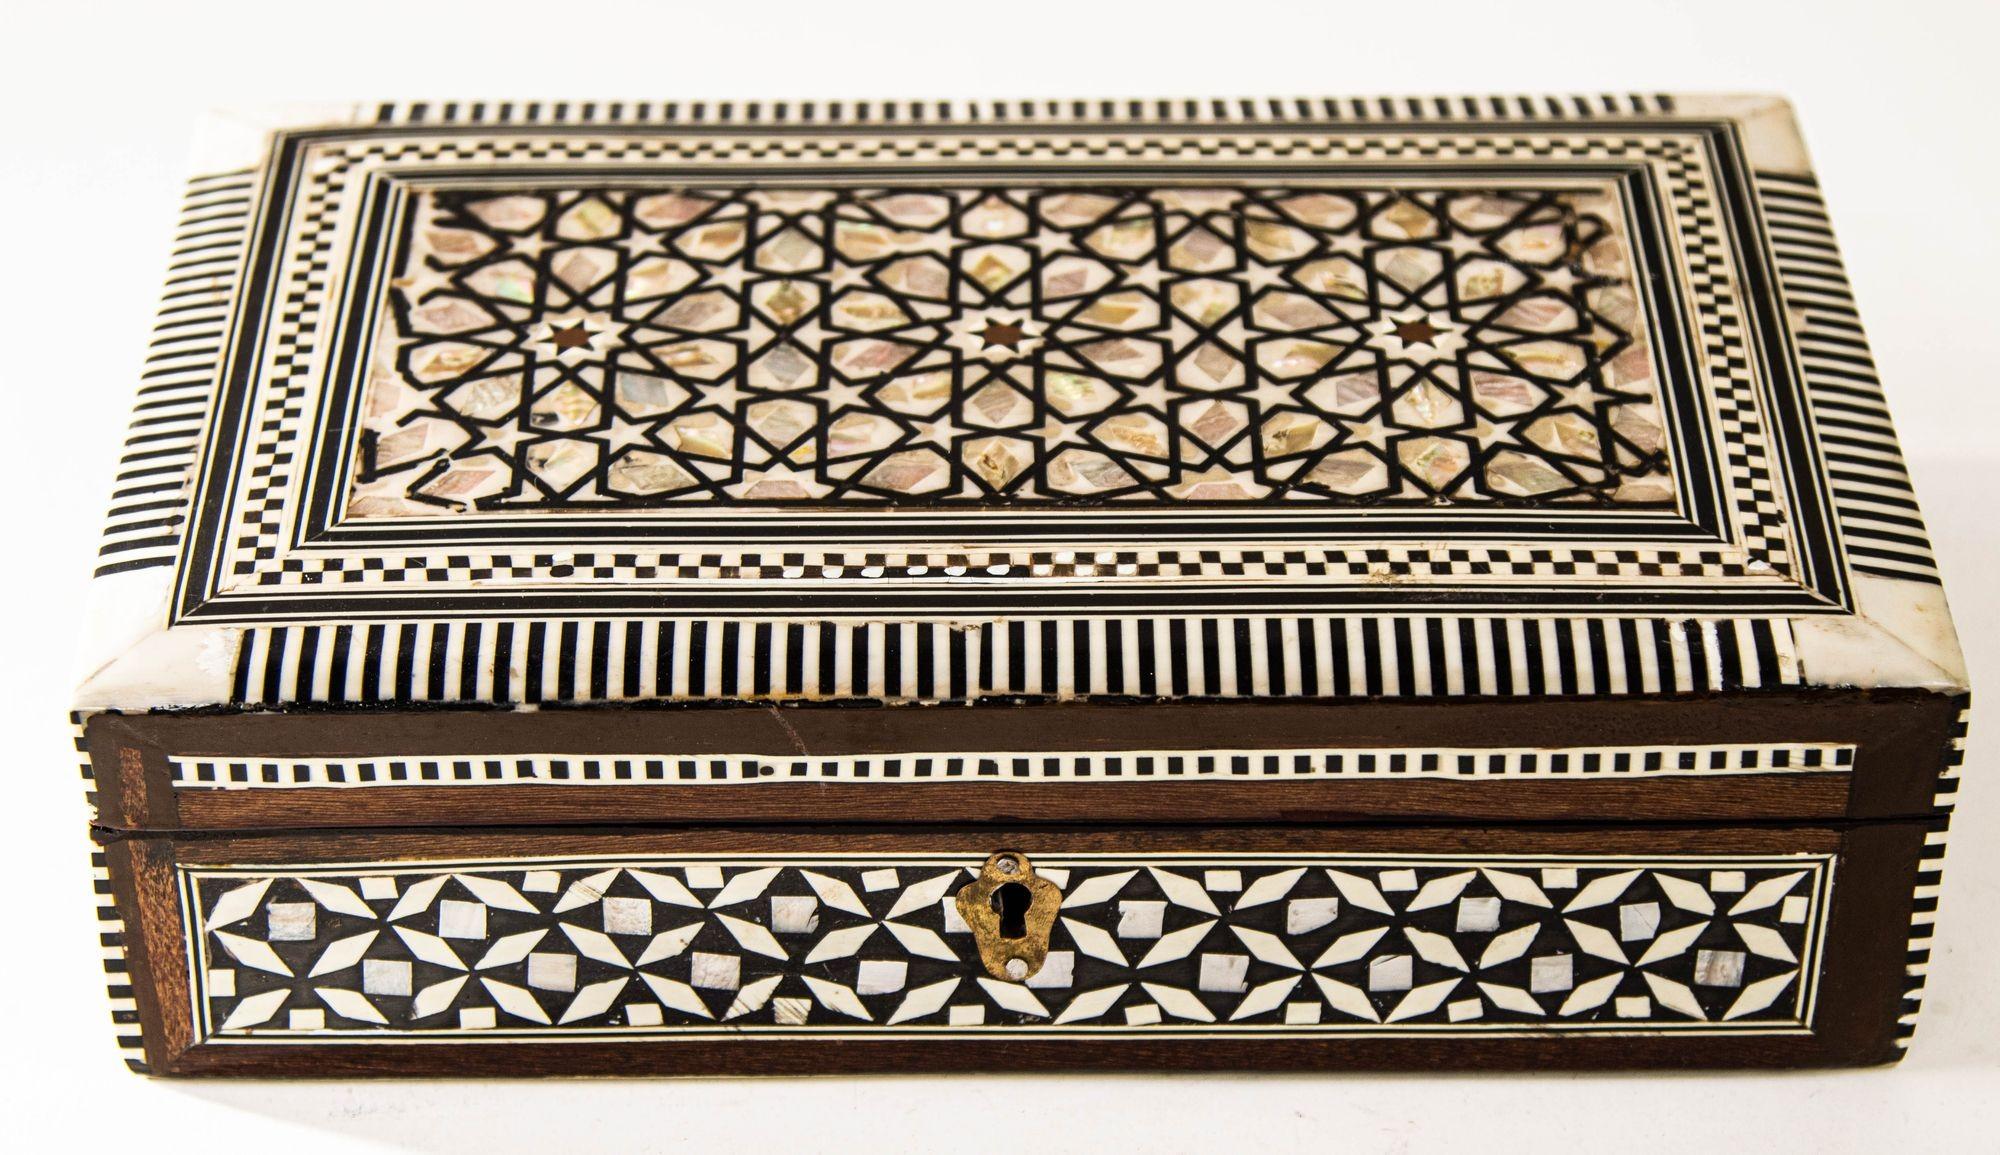 Vintage 1950s Mosaic Mother of Pearl Inlaid Decorative Middle Eastern Islamic Box.
Mosaik Large Luxury Decorative Middle Eastern Islamic Vanity Box.
Middle Eastern Mosaic Wood Box with Inlays of Bone and Mother of Pearl, C. 1950s
Exquisite